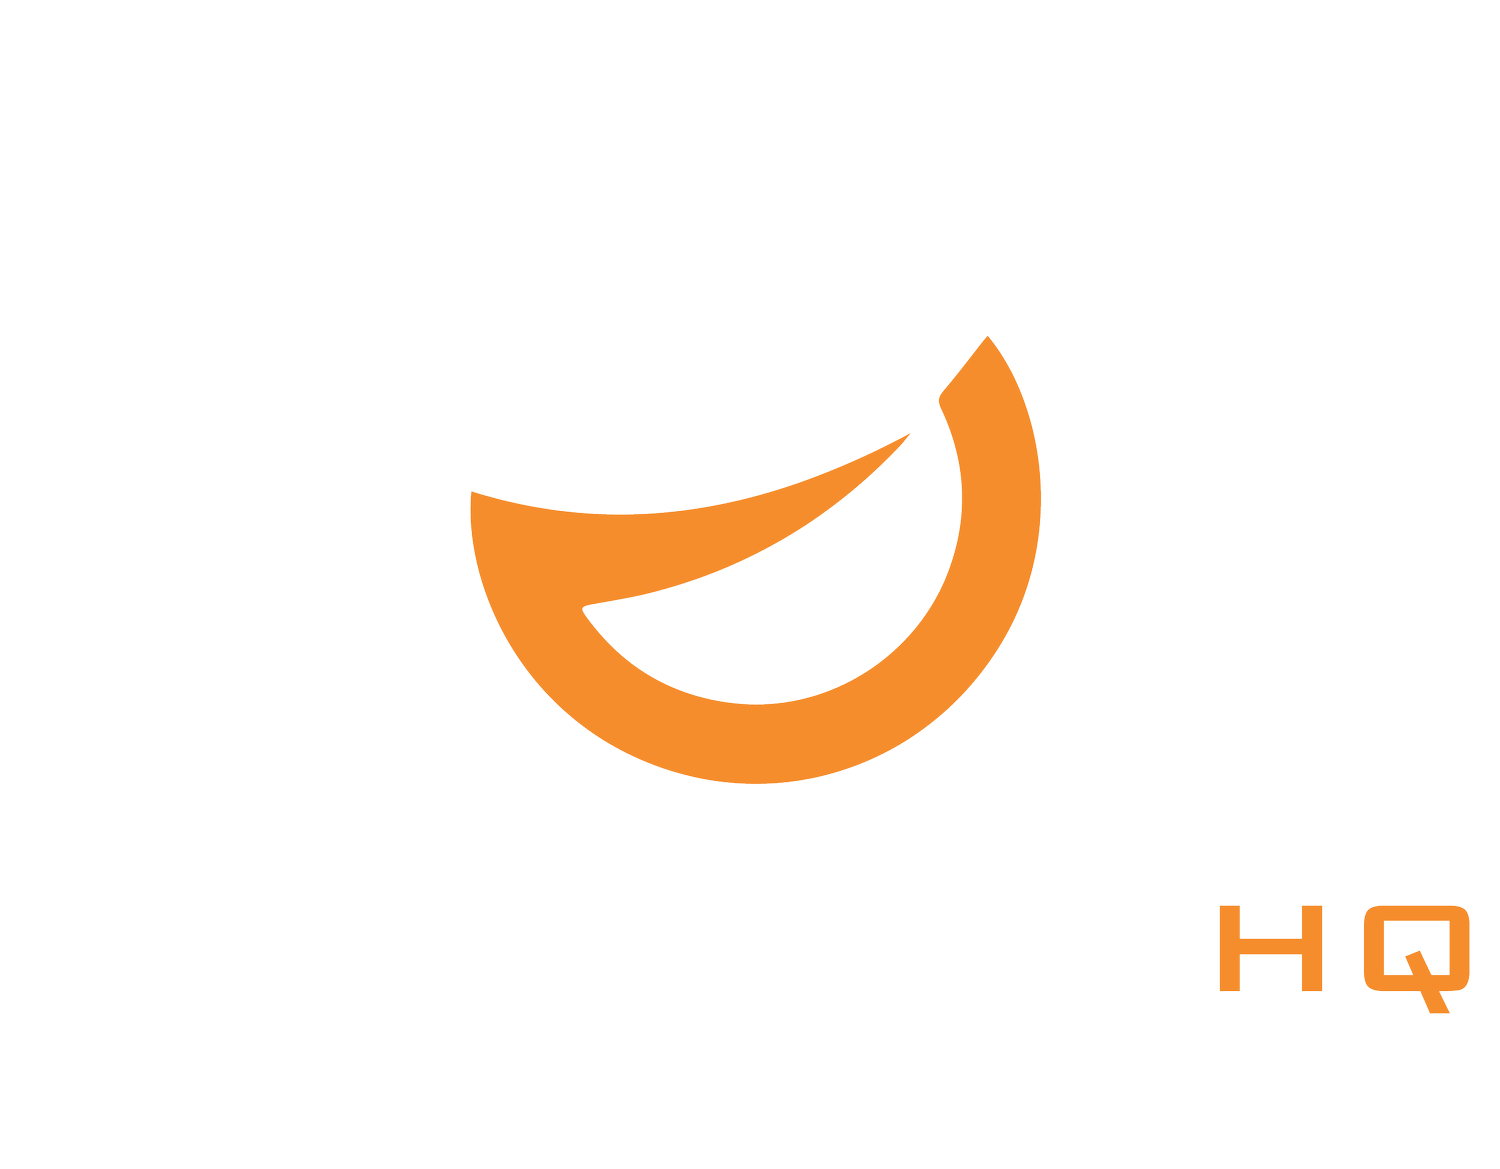 Wellbeing HQ